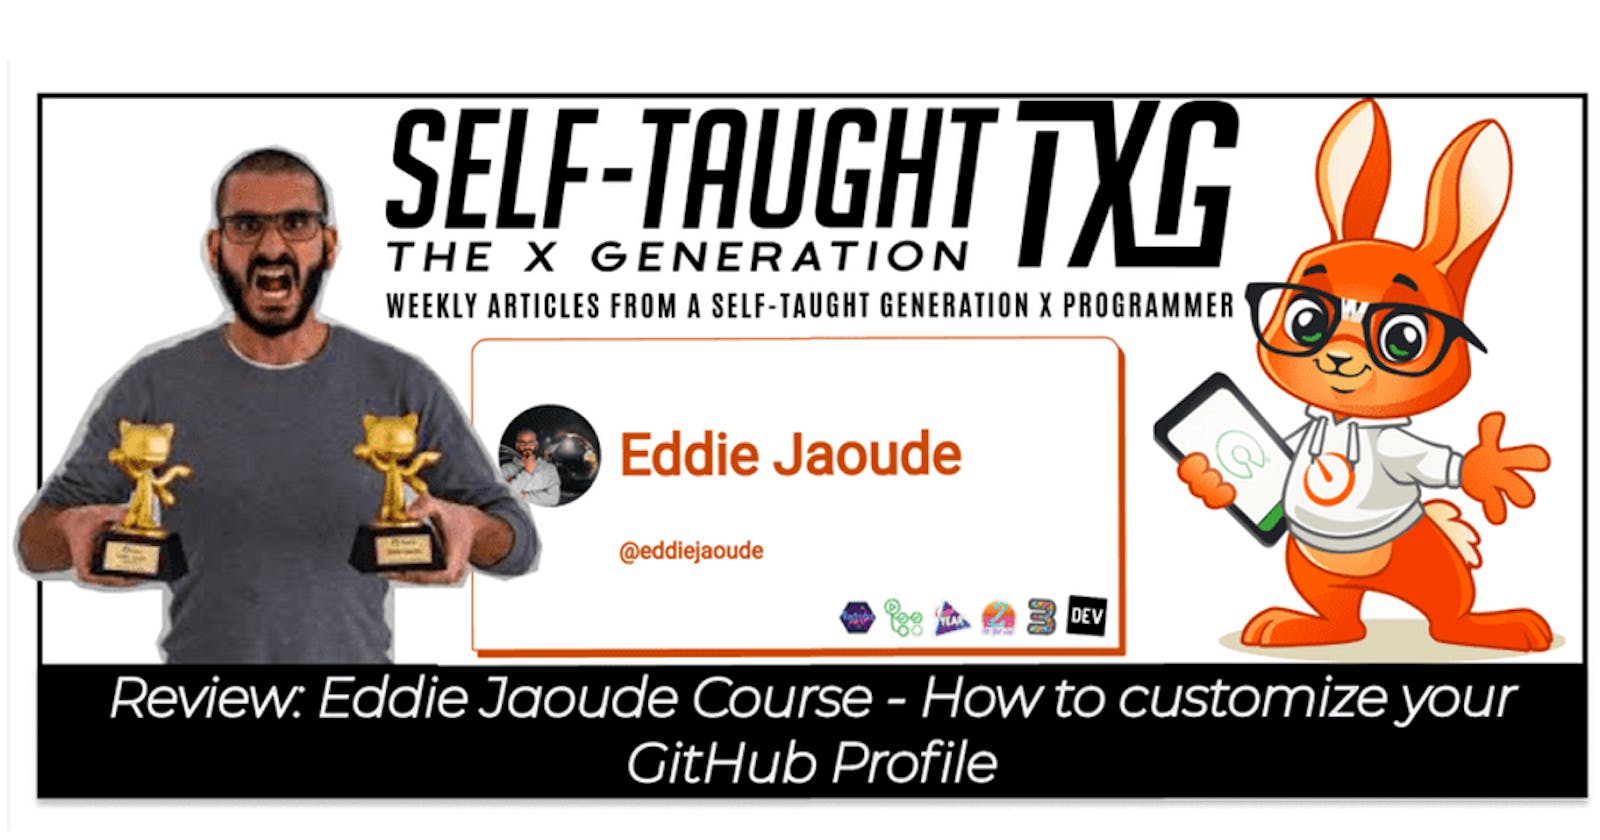 Review: Eddie Jaoude Course - How to customize your GitHub Profile